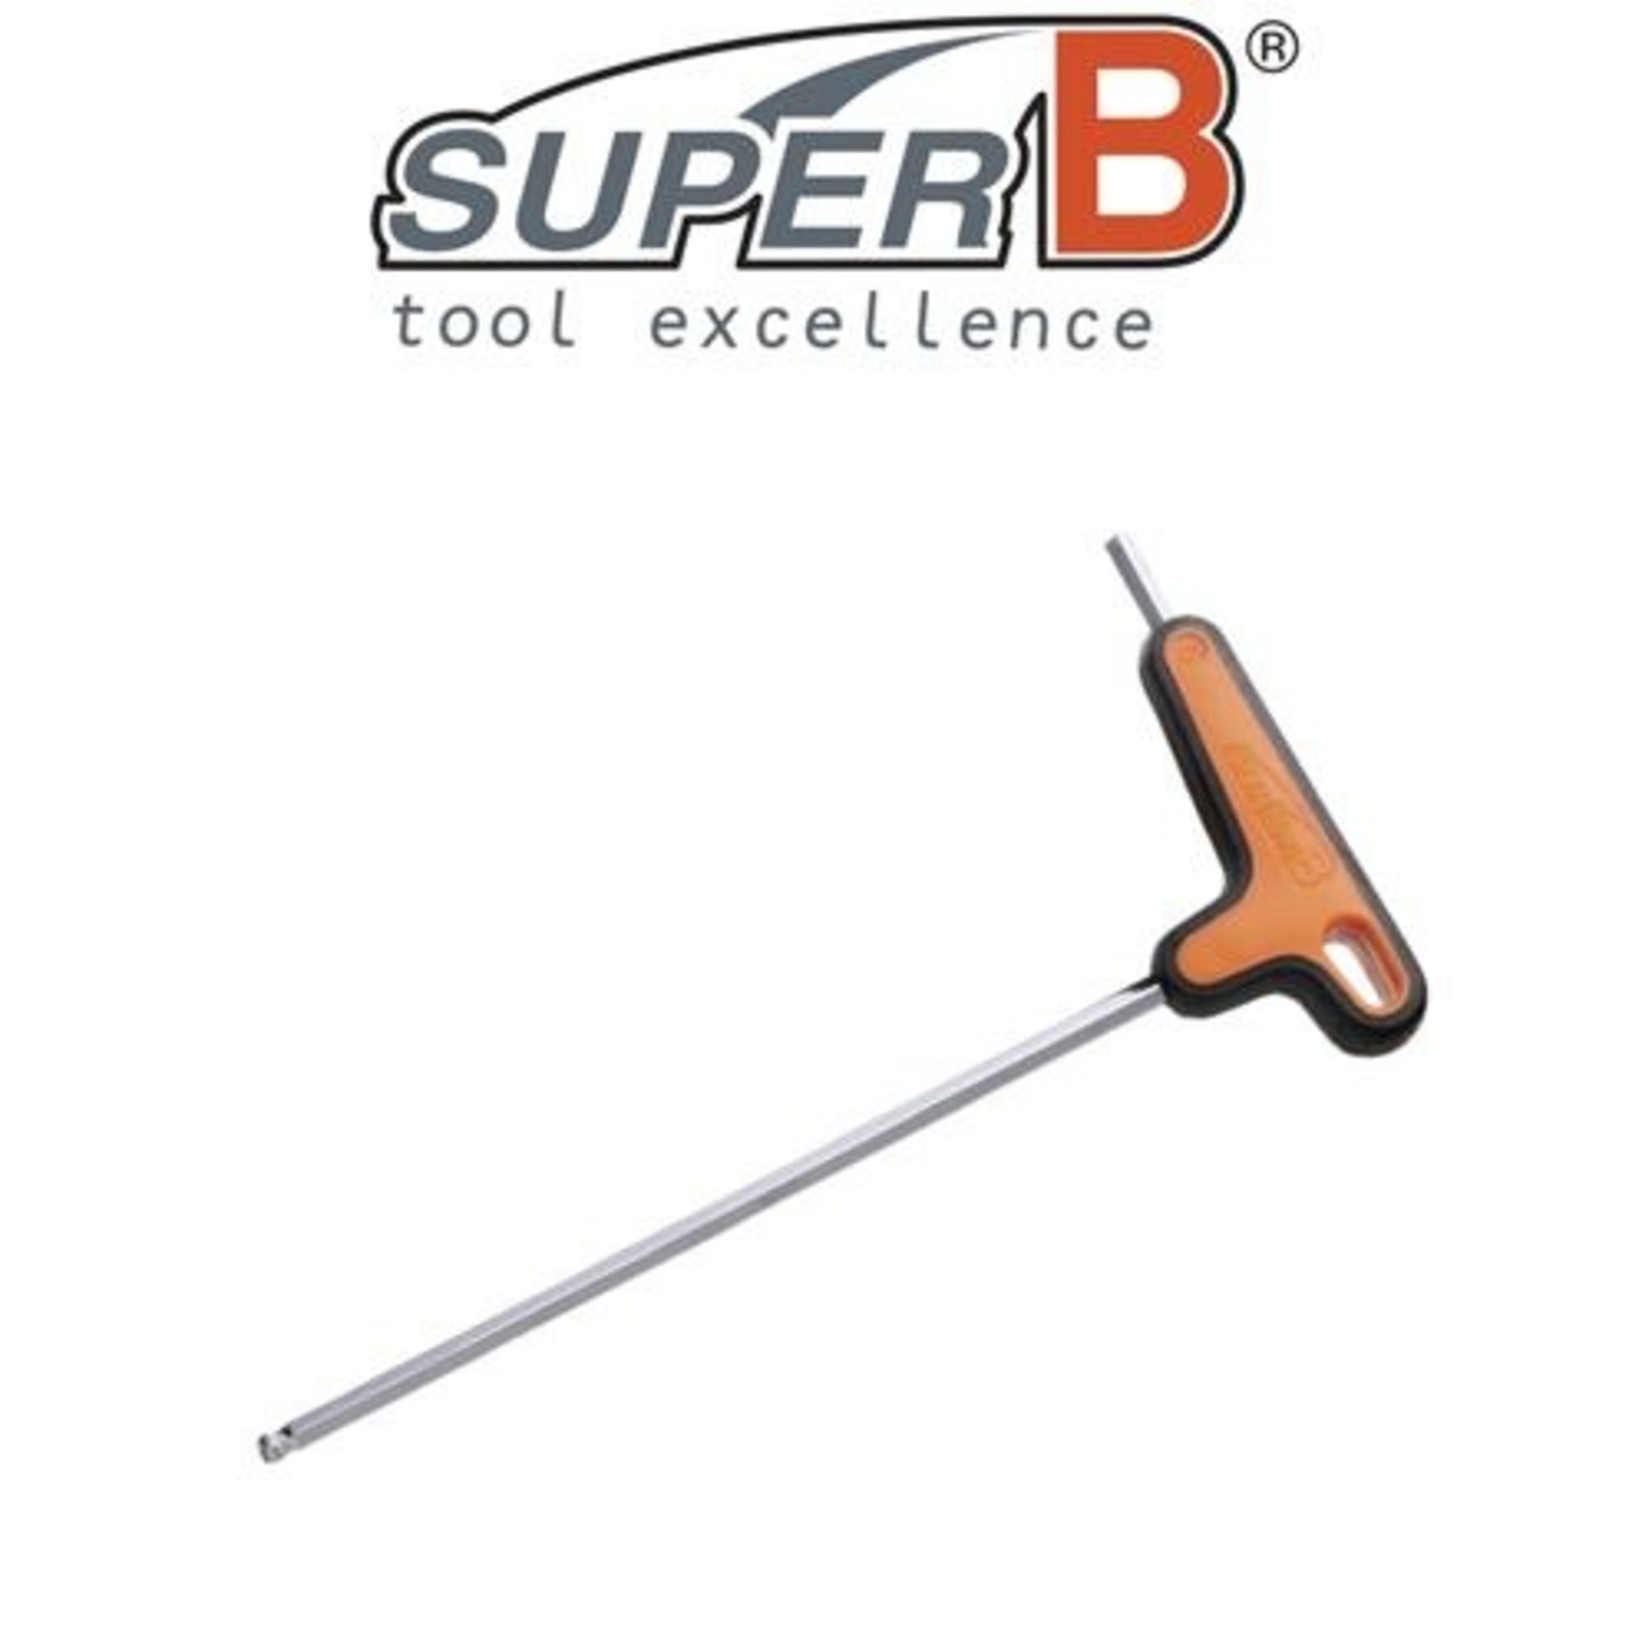 Super B SuperB T/L Handle Hex Wrench - Made of S2 Steel - 5mm Ball End - Bike Tool